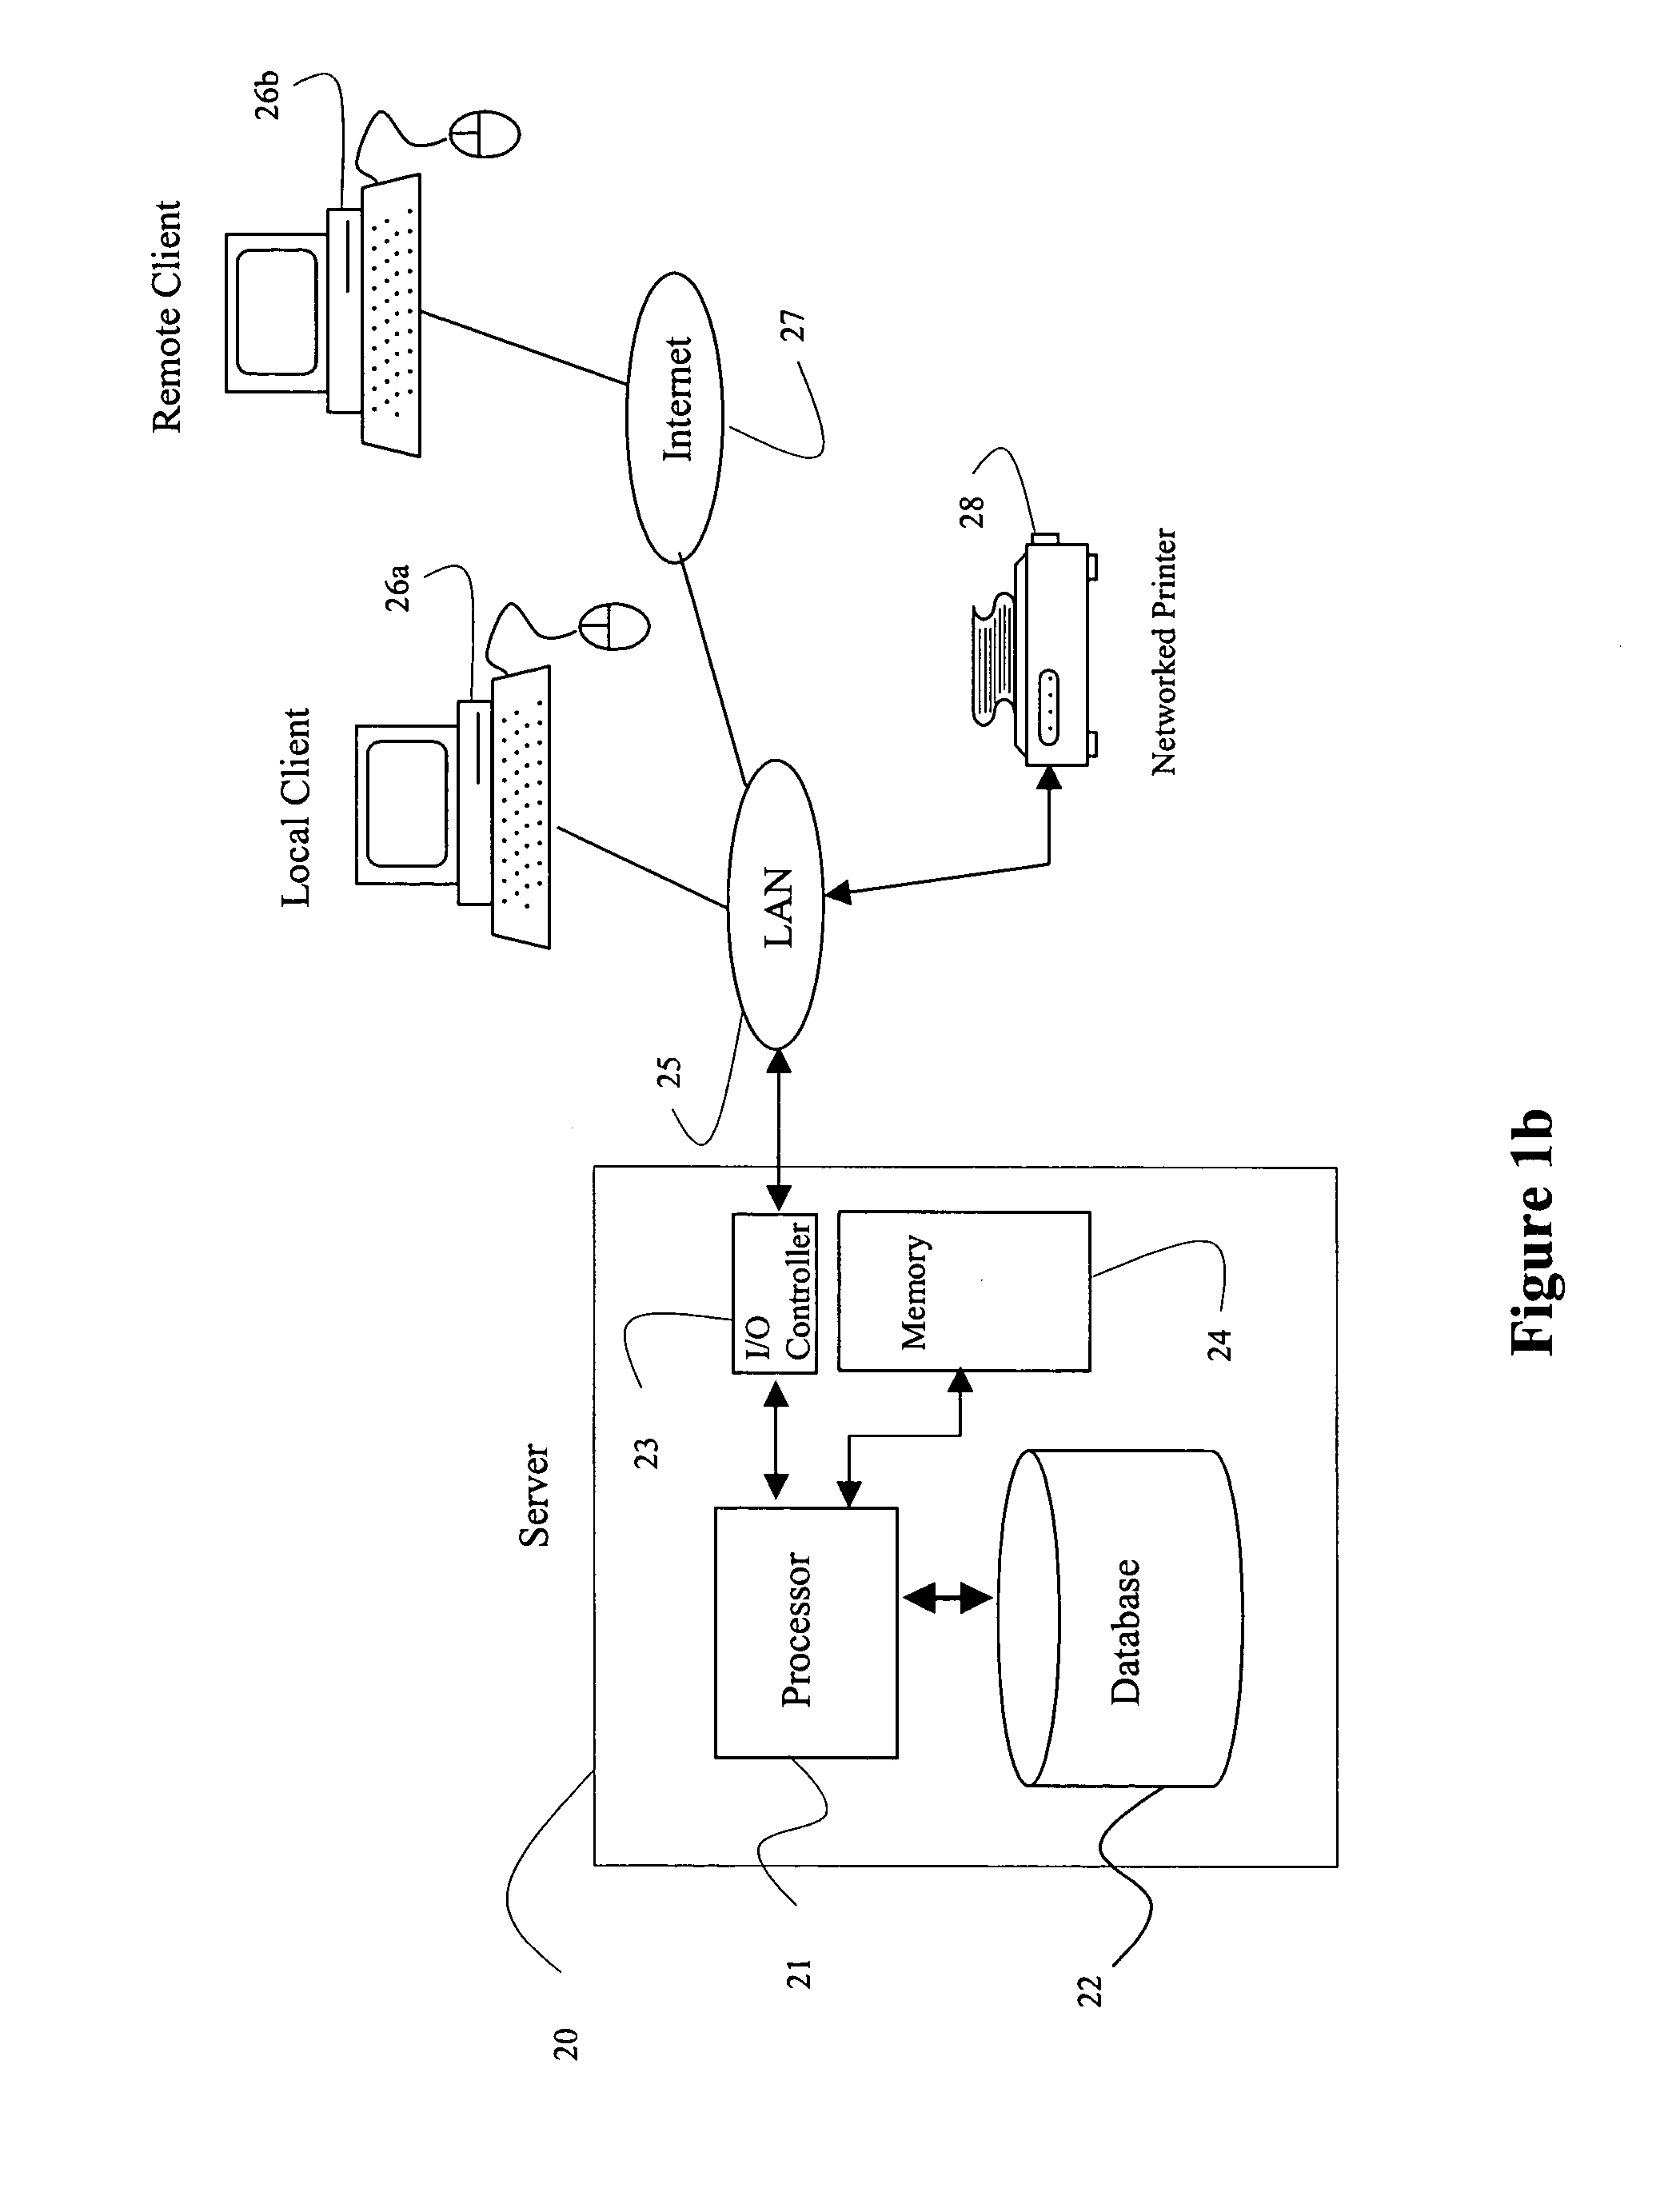 Multi-package delivery methods